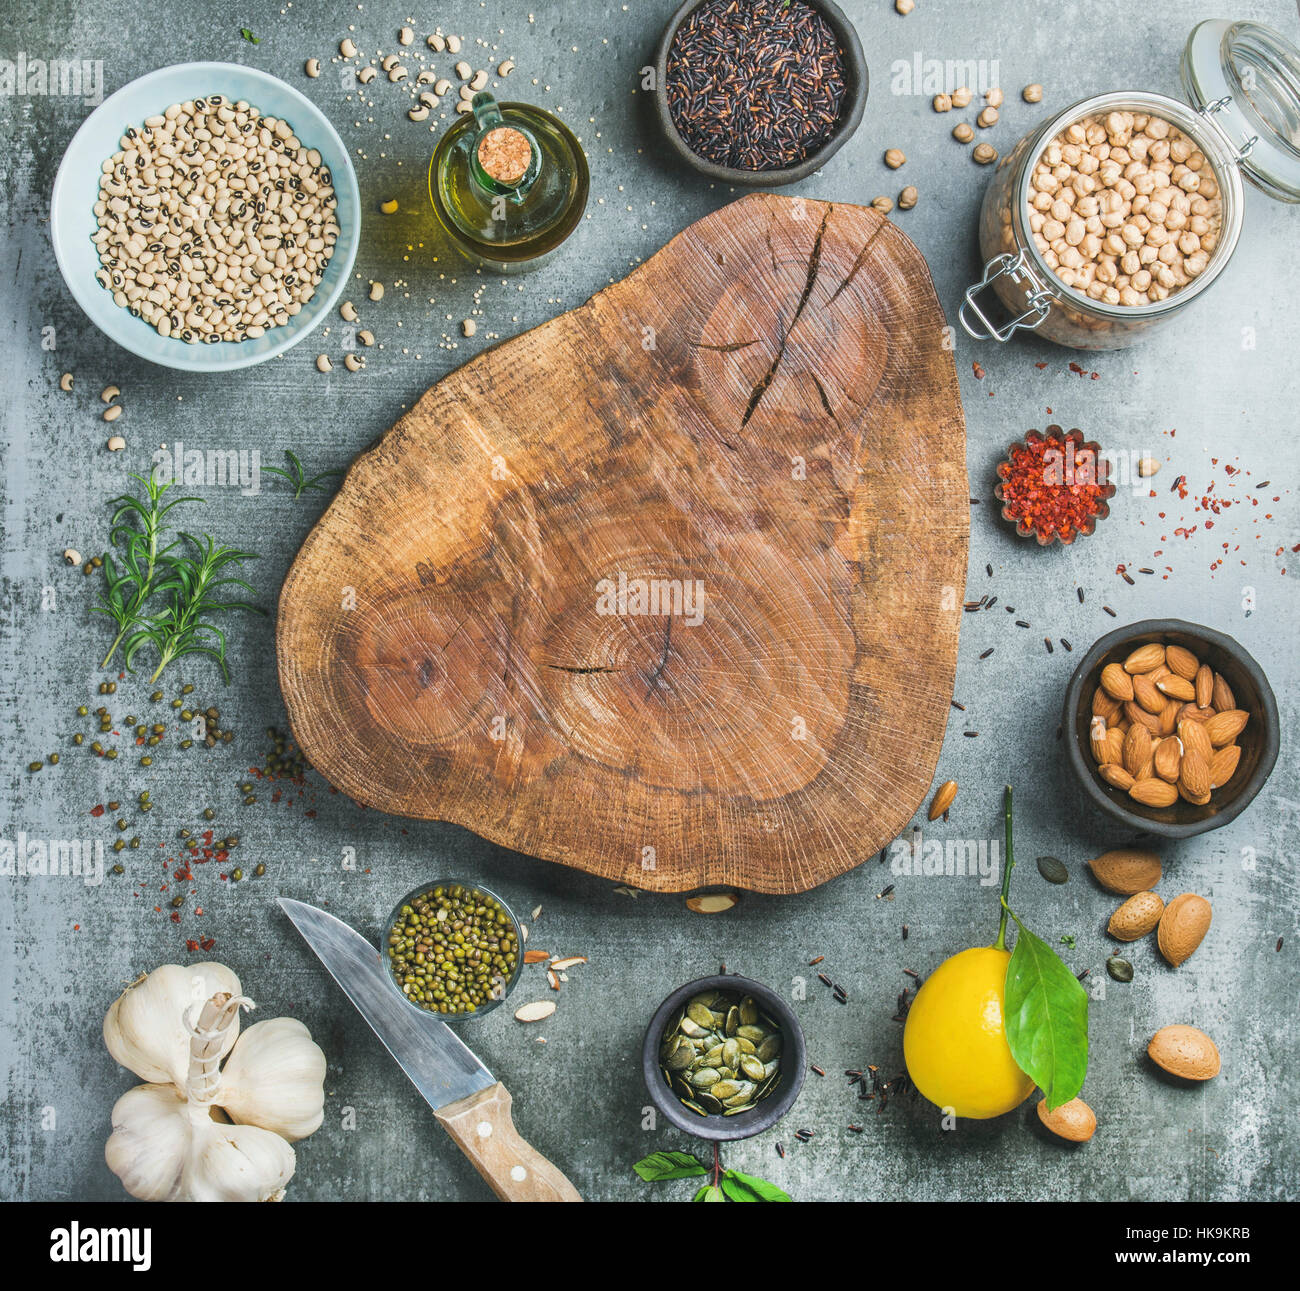 Ingredients for healthy cooking. Variety of beans, black rice, chickpeas, almonds, seeds, herbs, spices and olive oil over grey concrete textured back Stock Photo